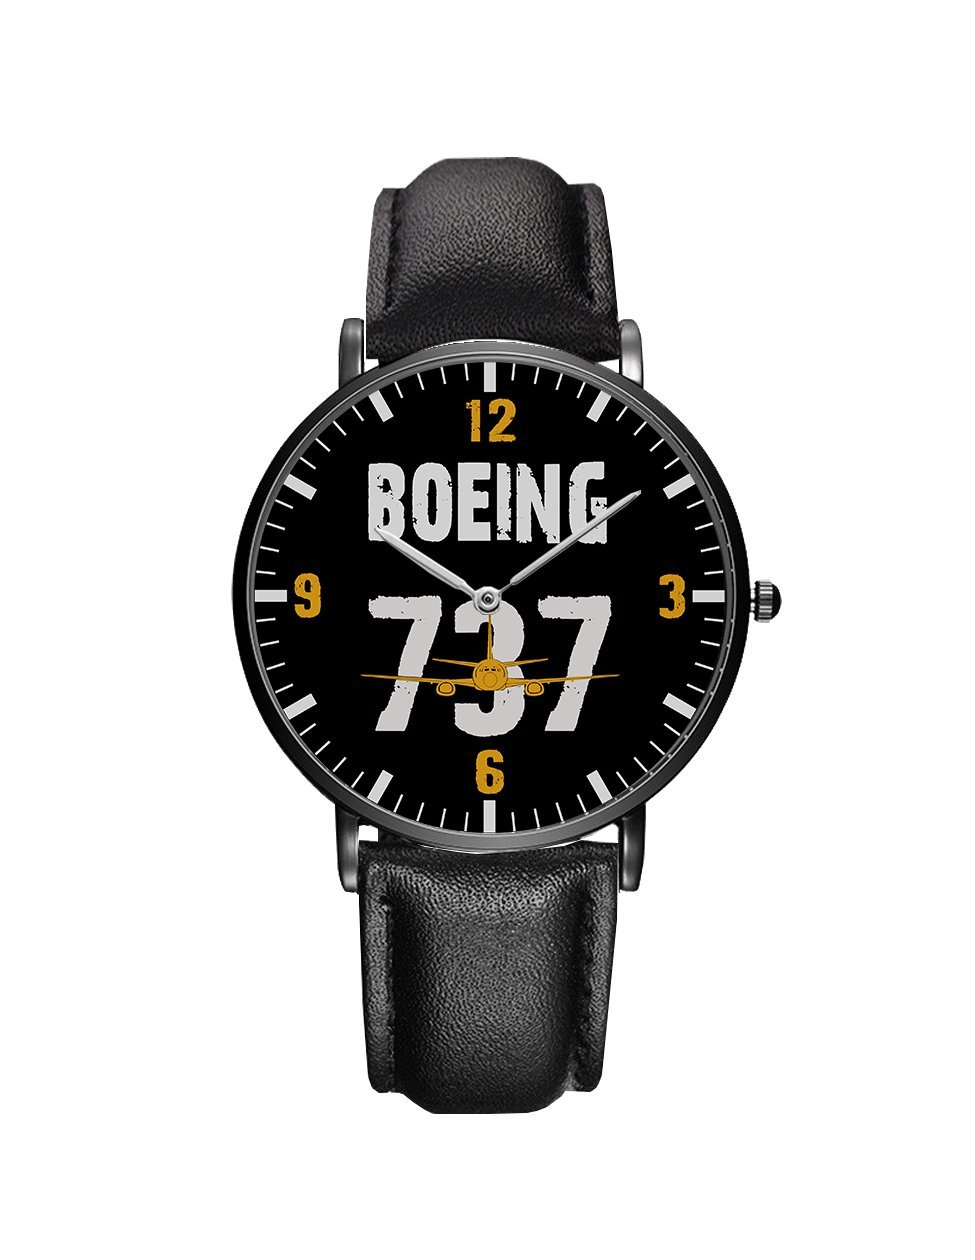 Boeing 737 Designed Leather Strap Watches Pilot Eyes Store Black & Black Leather Strap 